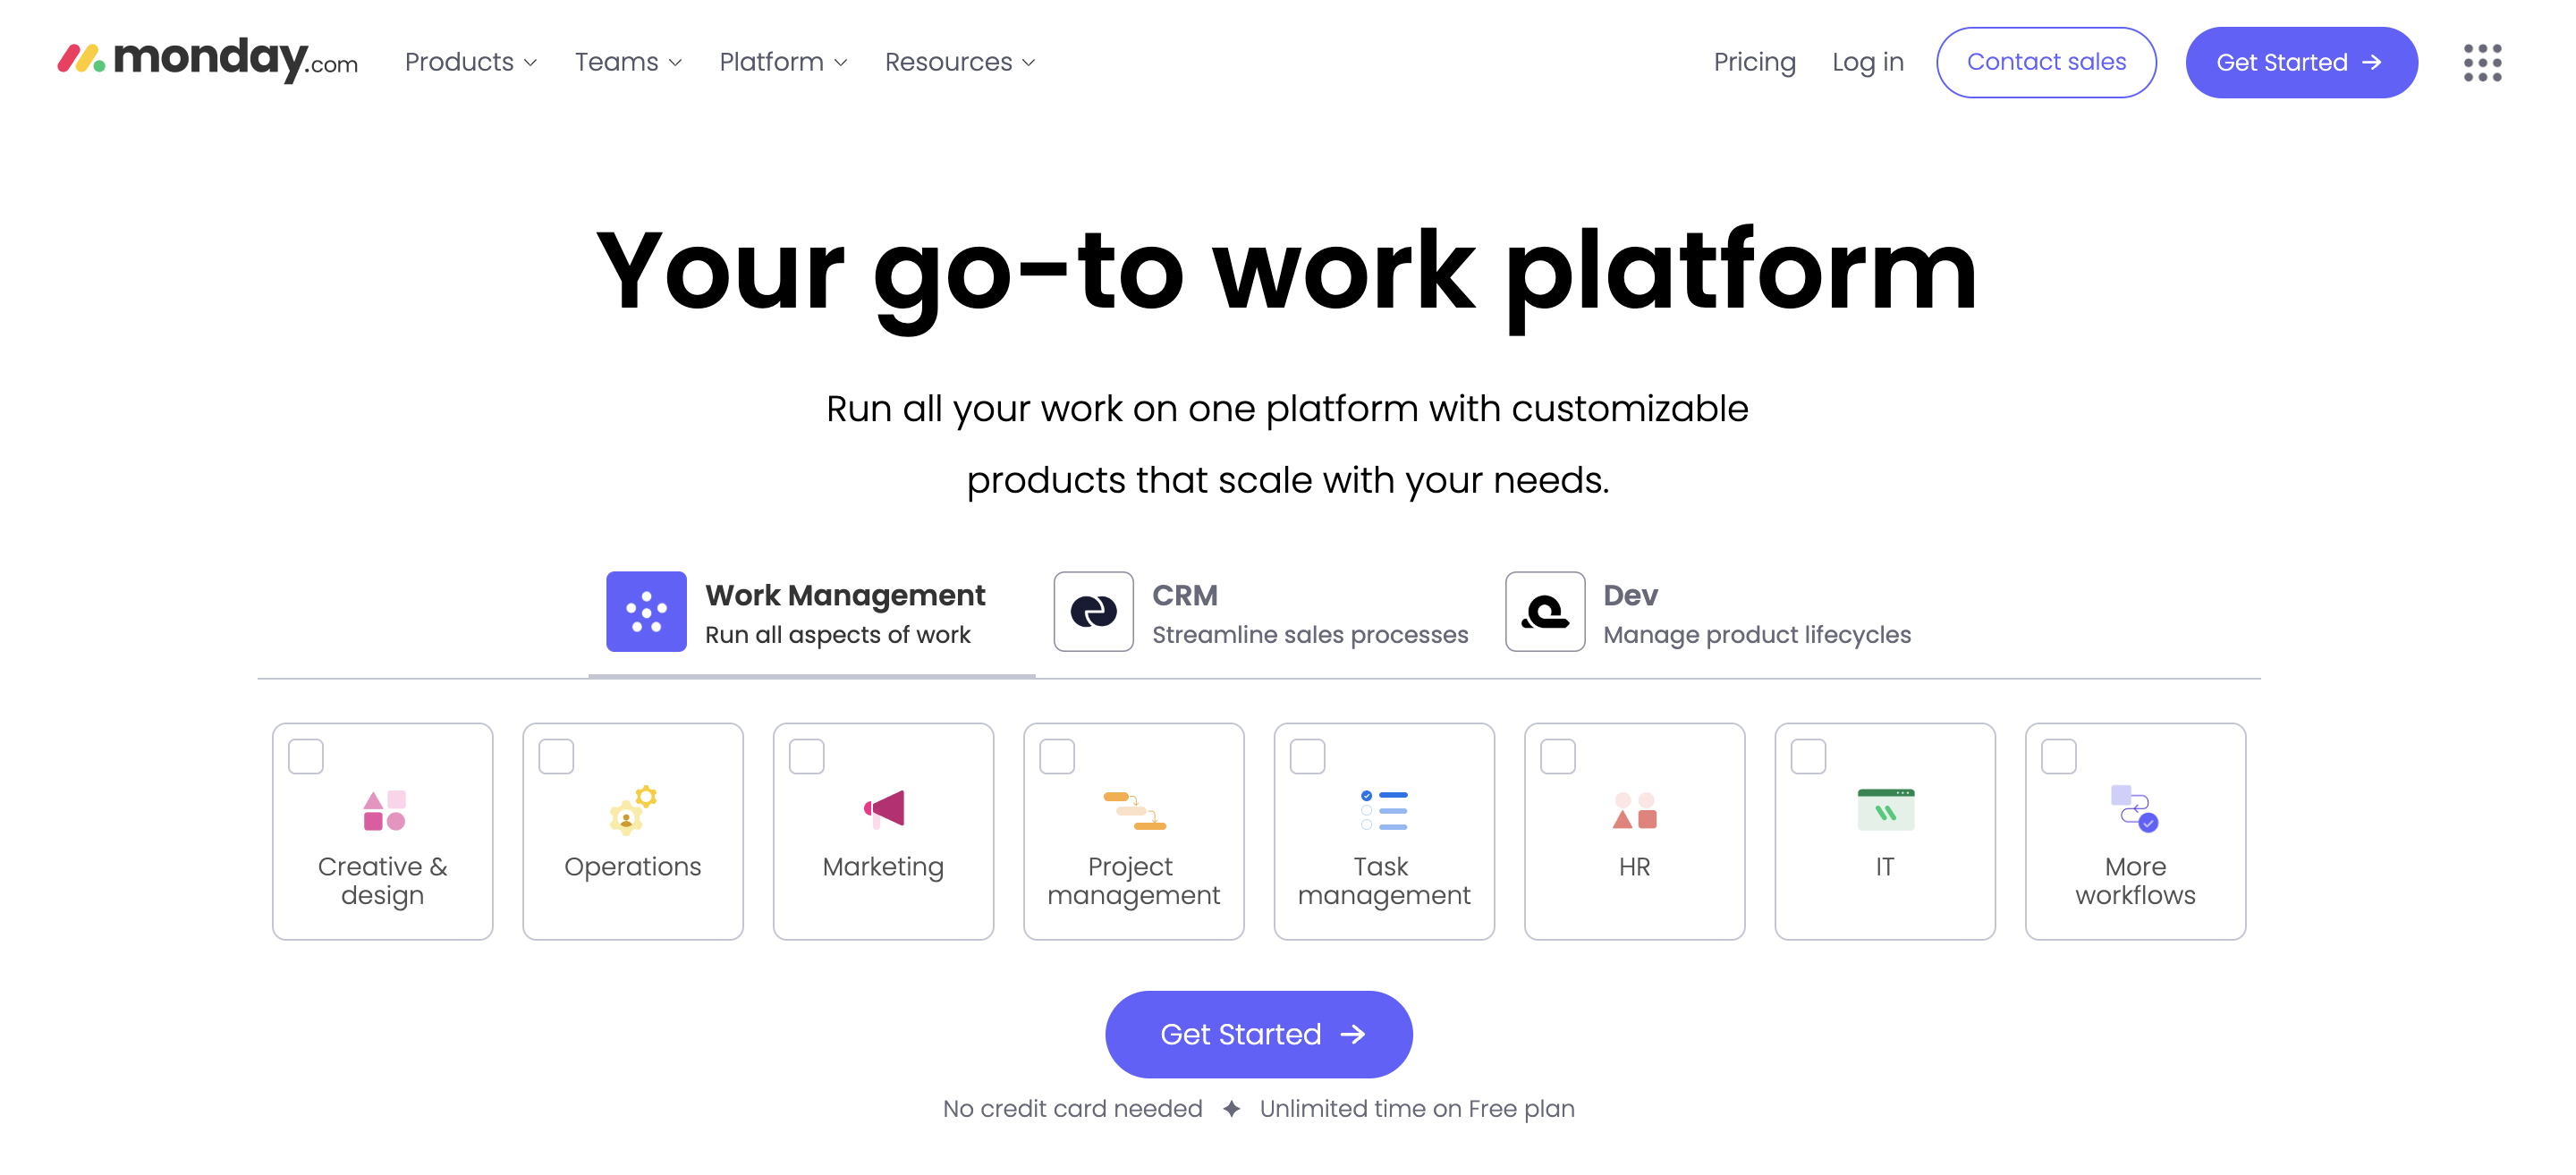 Go-to work platform for accouting